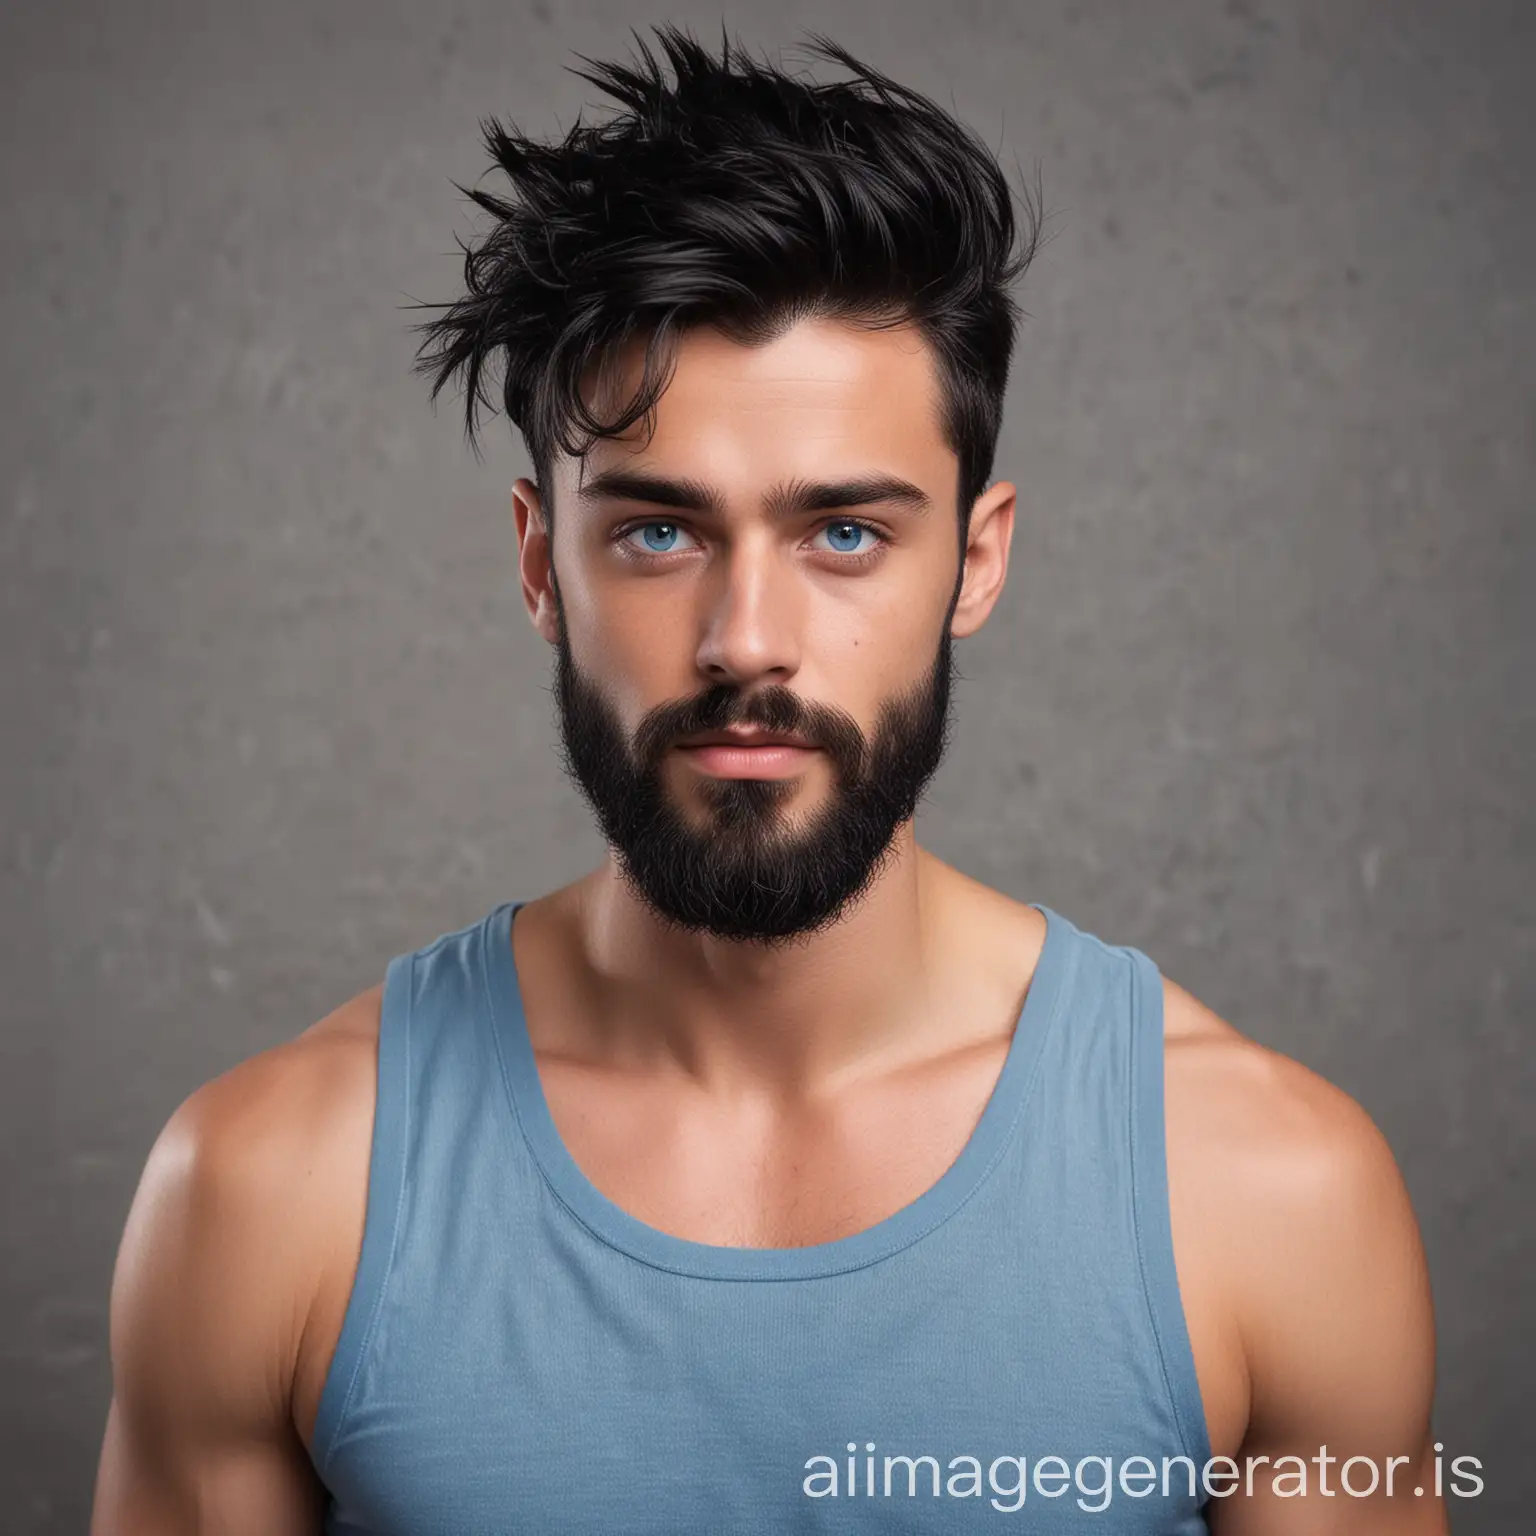 Muscular-Dutchman-with-Quiff-Hairstyle-and-Beard-in-Tank-Top